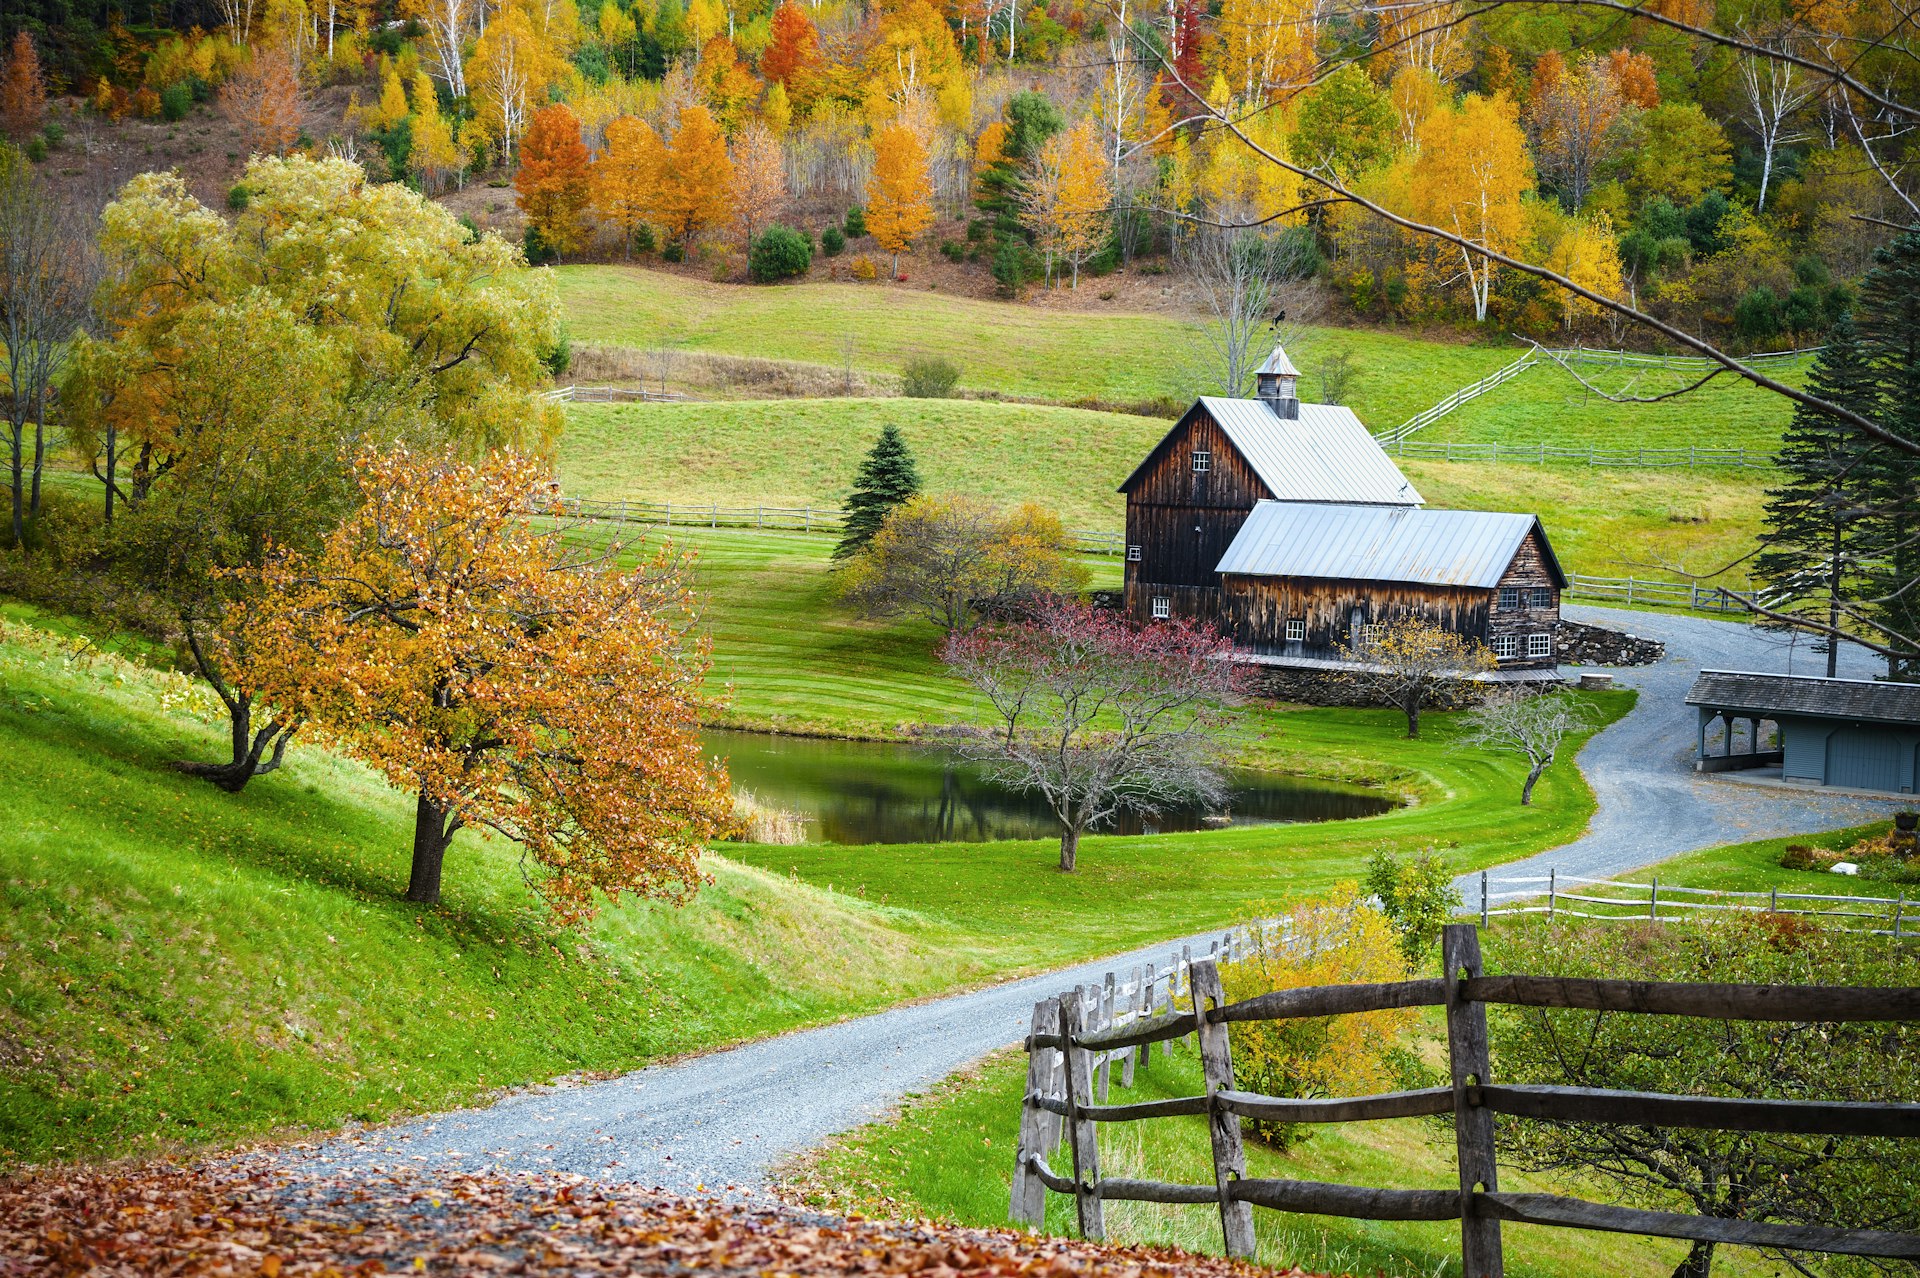 Old wooden barn surrounded by colorful trees, farm in autumn landscape